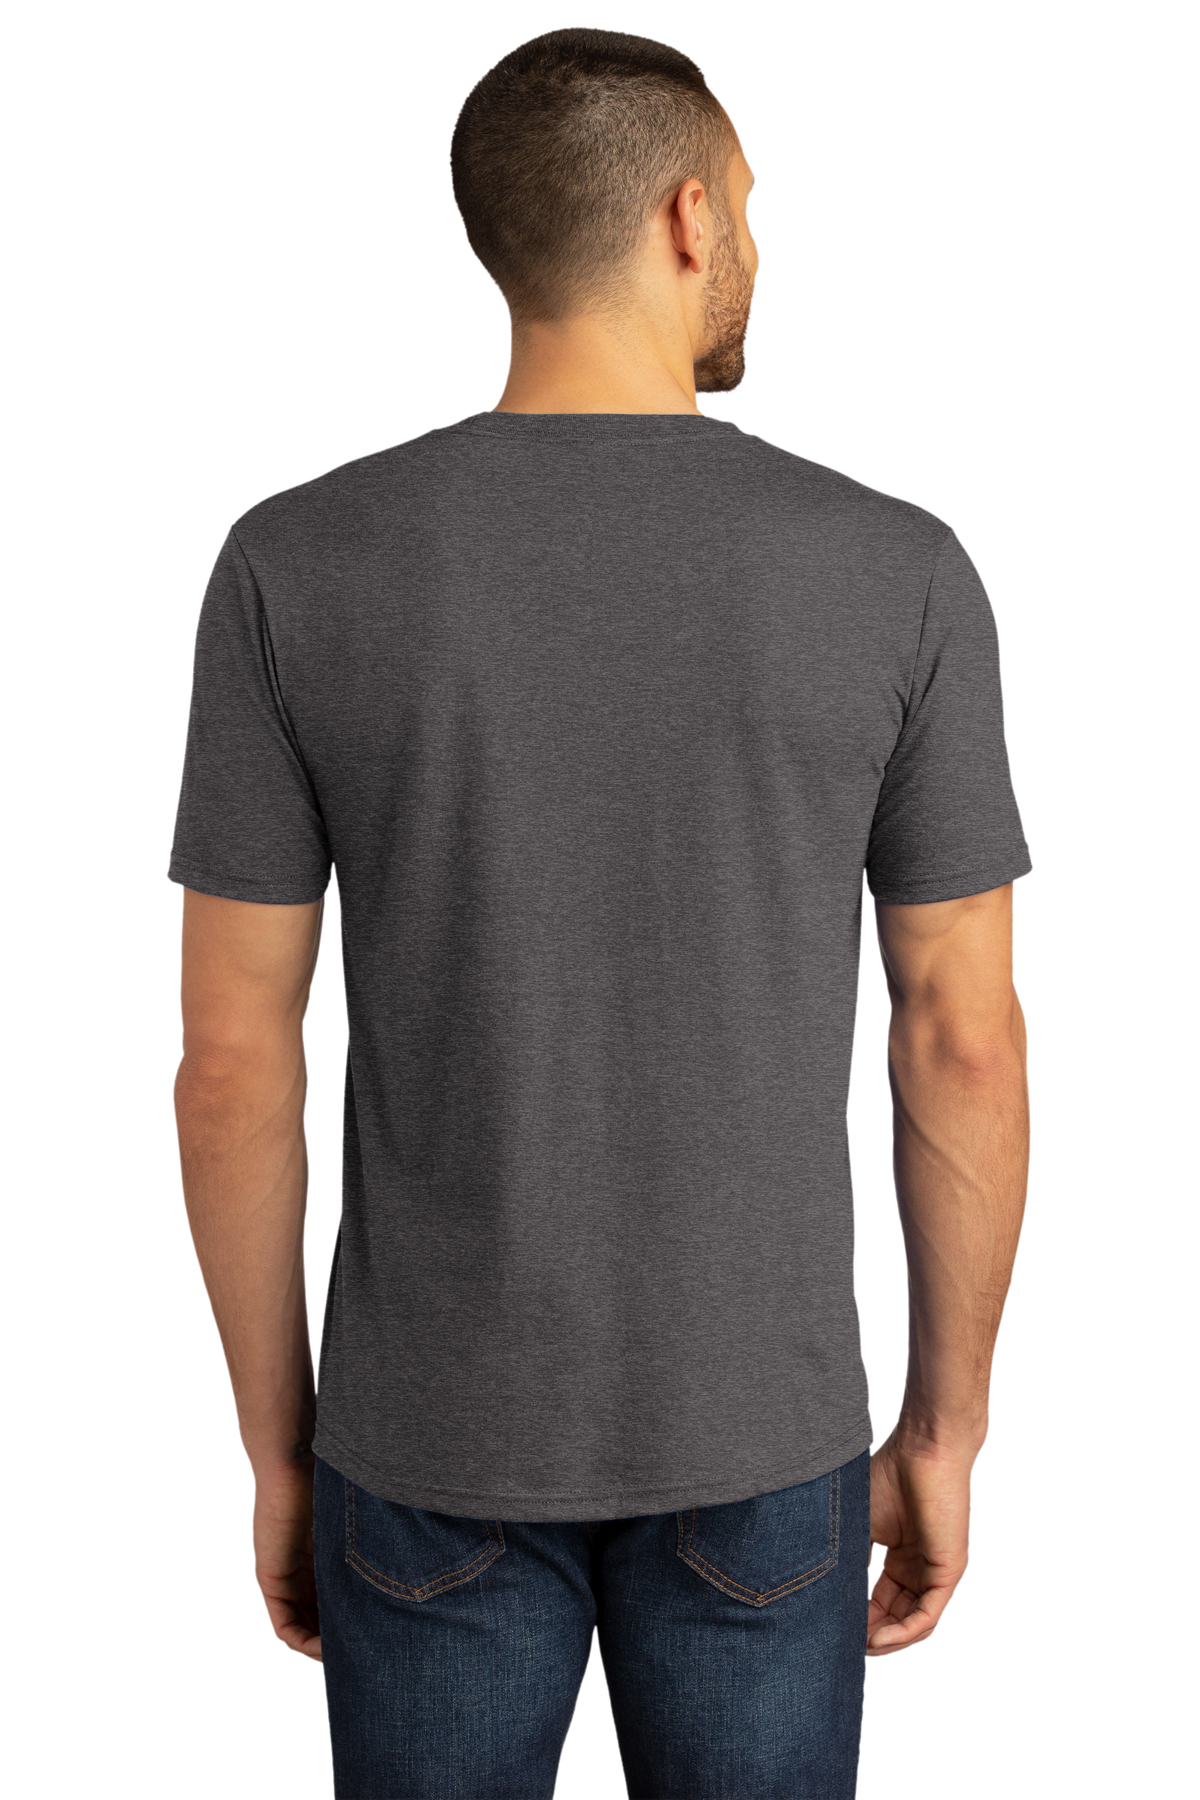 District Perfect Tri DTG Tee | Product | SanMar